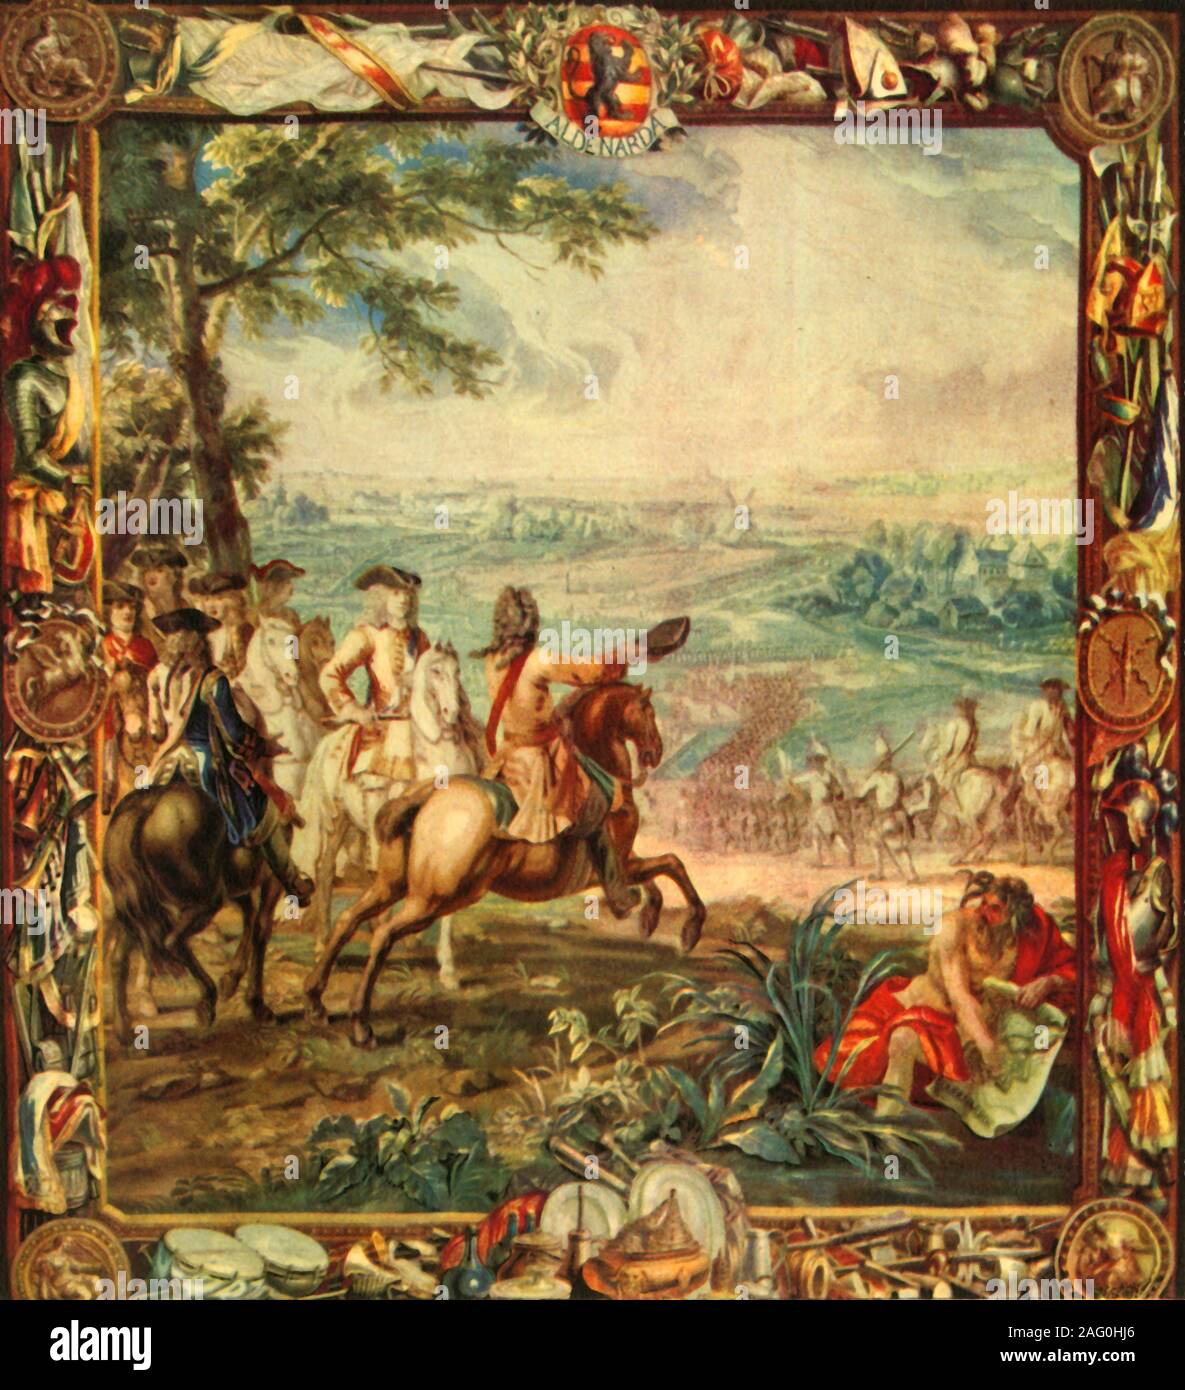 'Marlborough at the Battle of Oudenarde, 1708', (1944). Tapestry depicting British military leader John Churchill, 1st Duke of Marlborough (on a white horse) at the Battle of Oudenarde, fought in July 1708 at Oudenaarde in Flanders, during the the War of the Spanish Succession. The battle was fought between the forces of Great Britain, the Dutch Republic and the Holy Roman Empire on the one side and those of France on the other, and resulted in a victory for the allies. This is one of the Victory tapestries commissioned by the Duke to commemorate his victories at Blendheim, Ramilles, Oudenarde Stock Photo